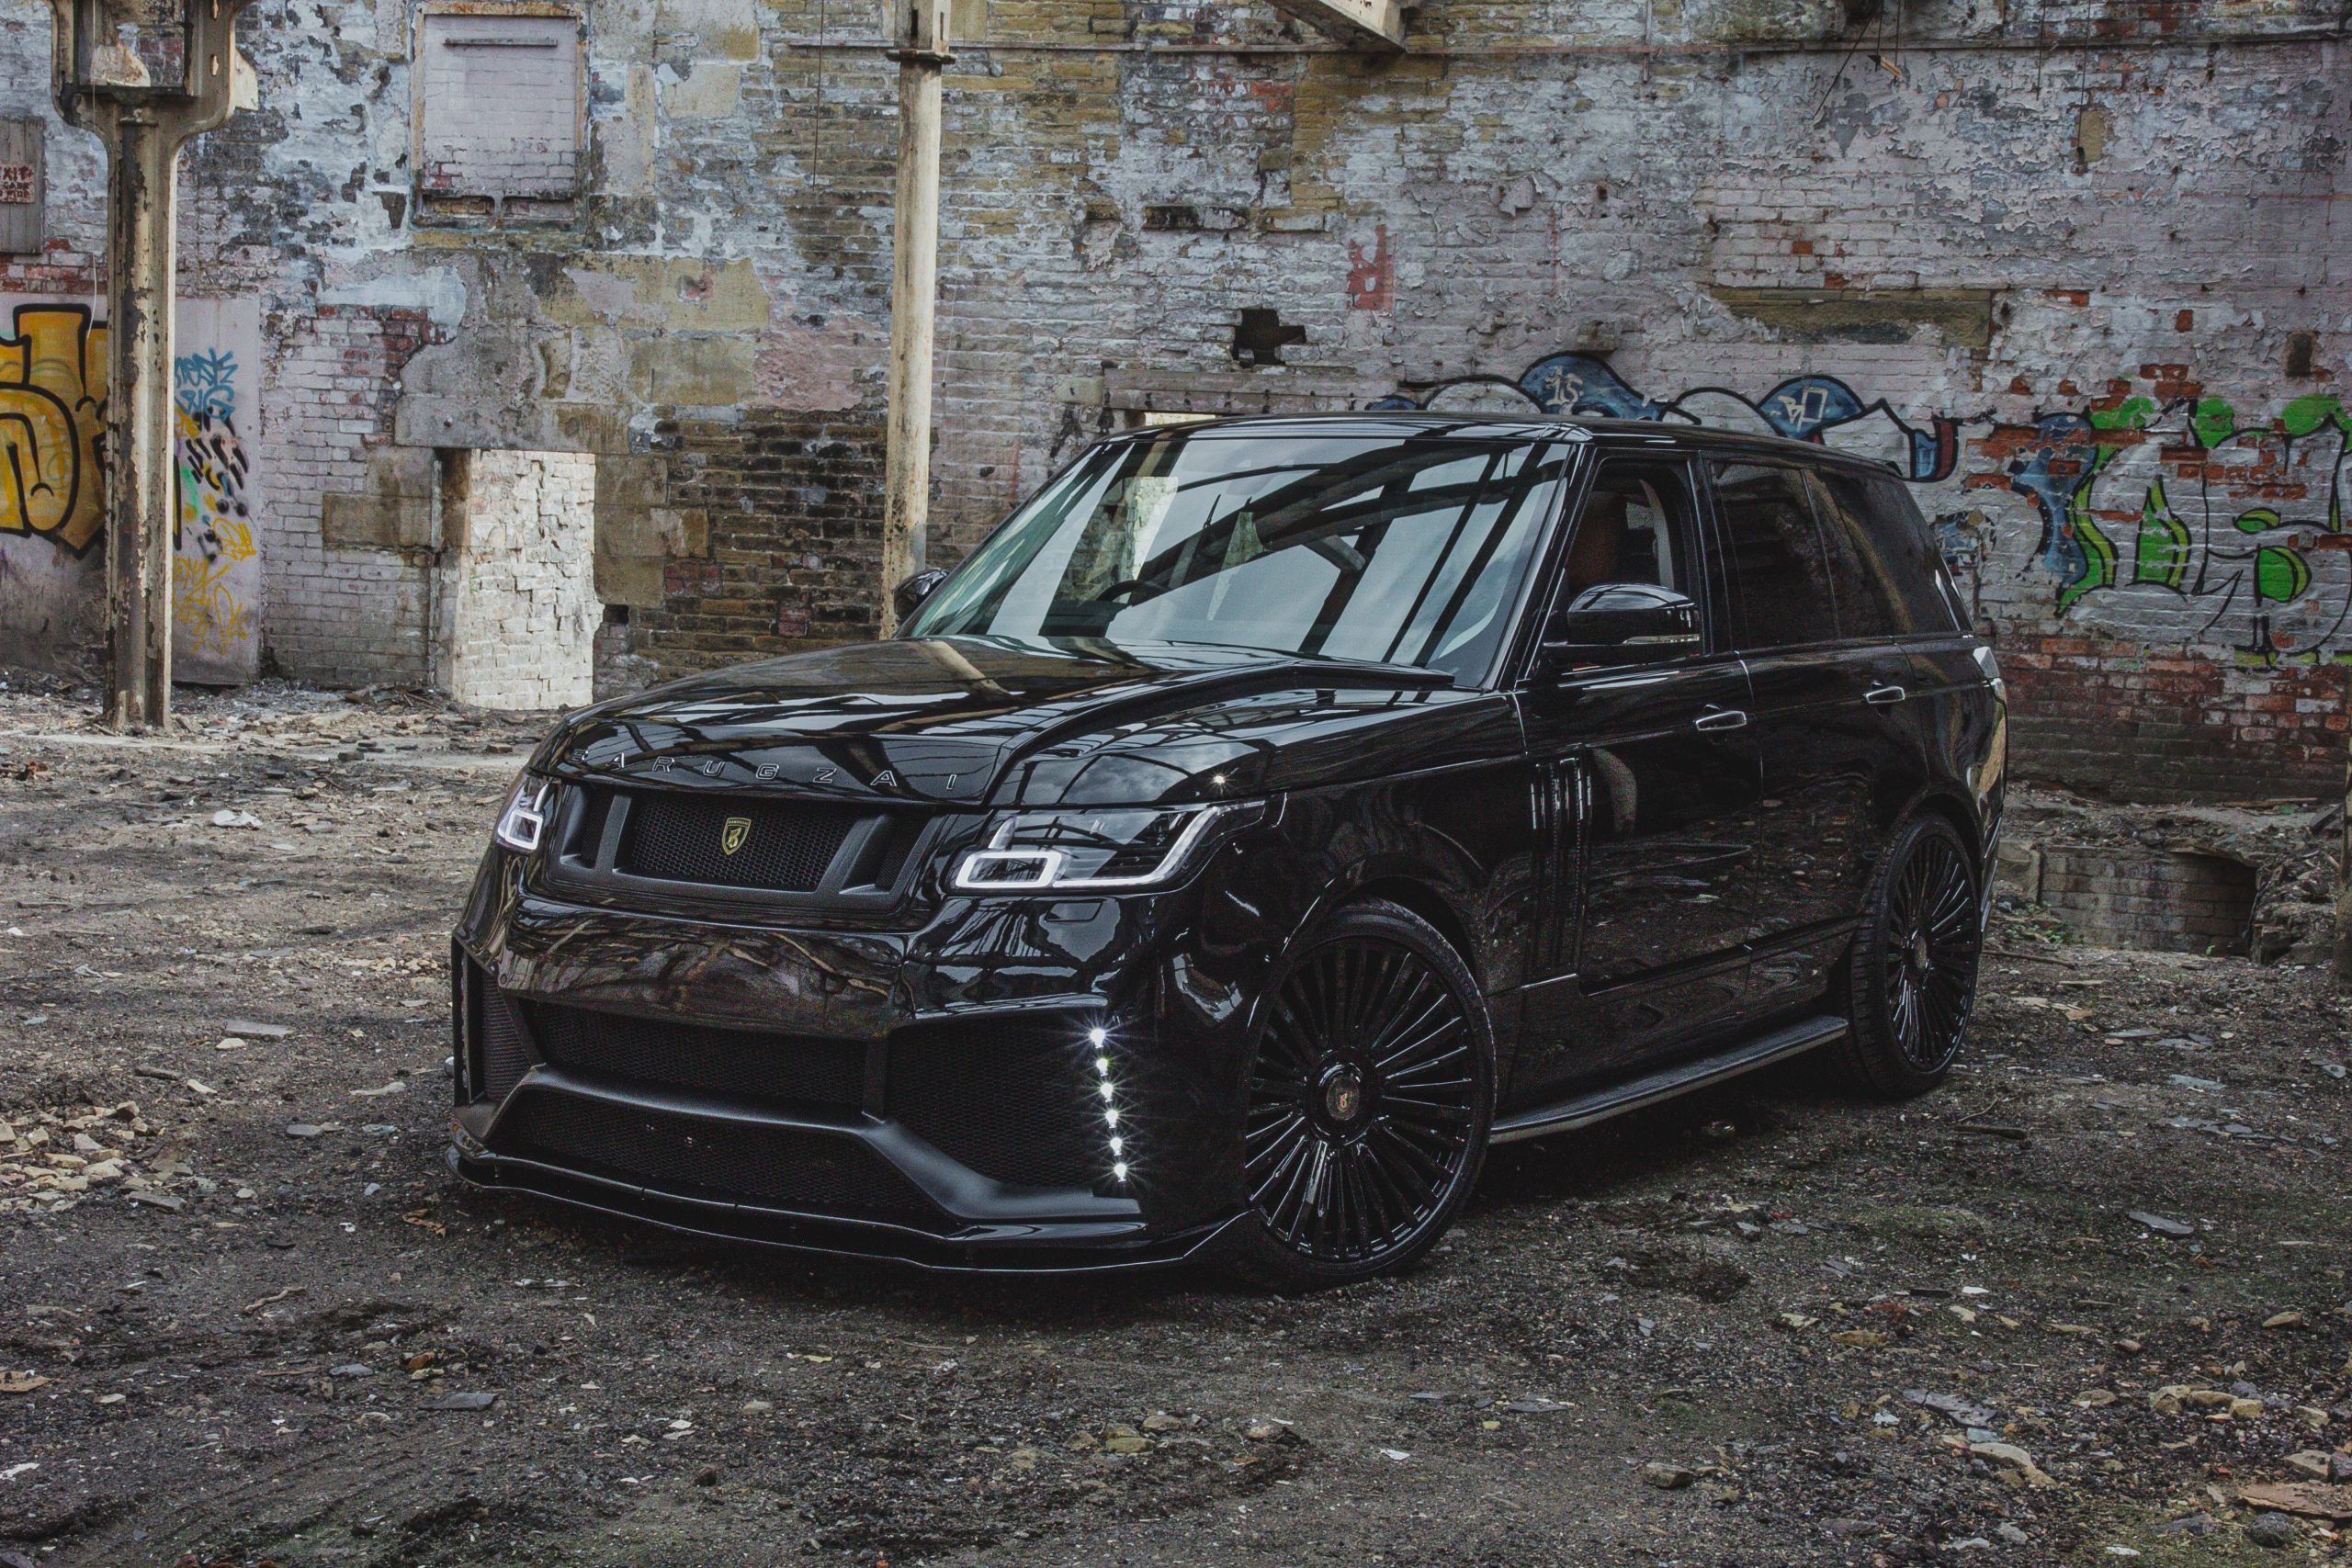 Check our price and buy Barugzai Bison body kit for Land Rover Range Rover Vogue (2019+)